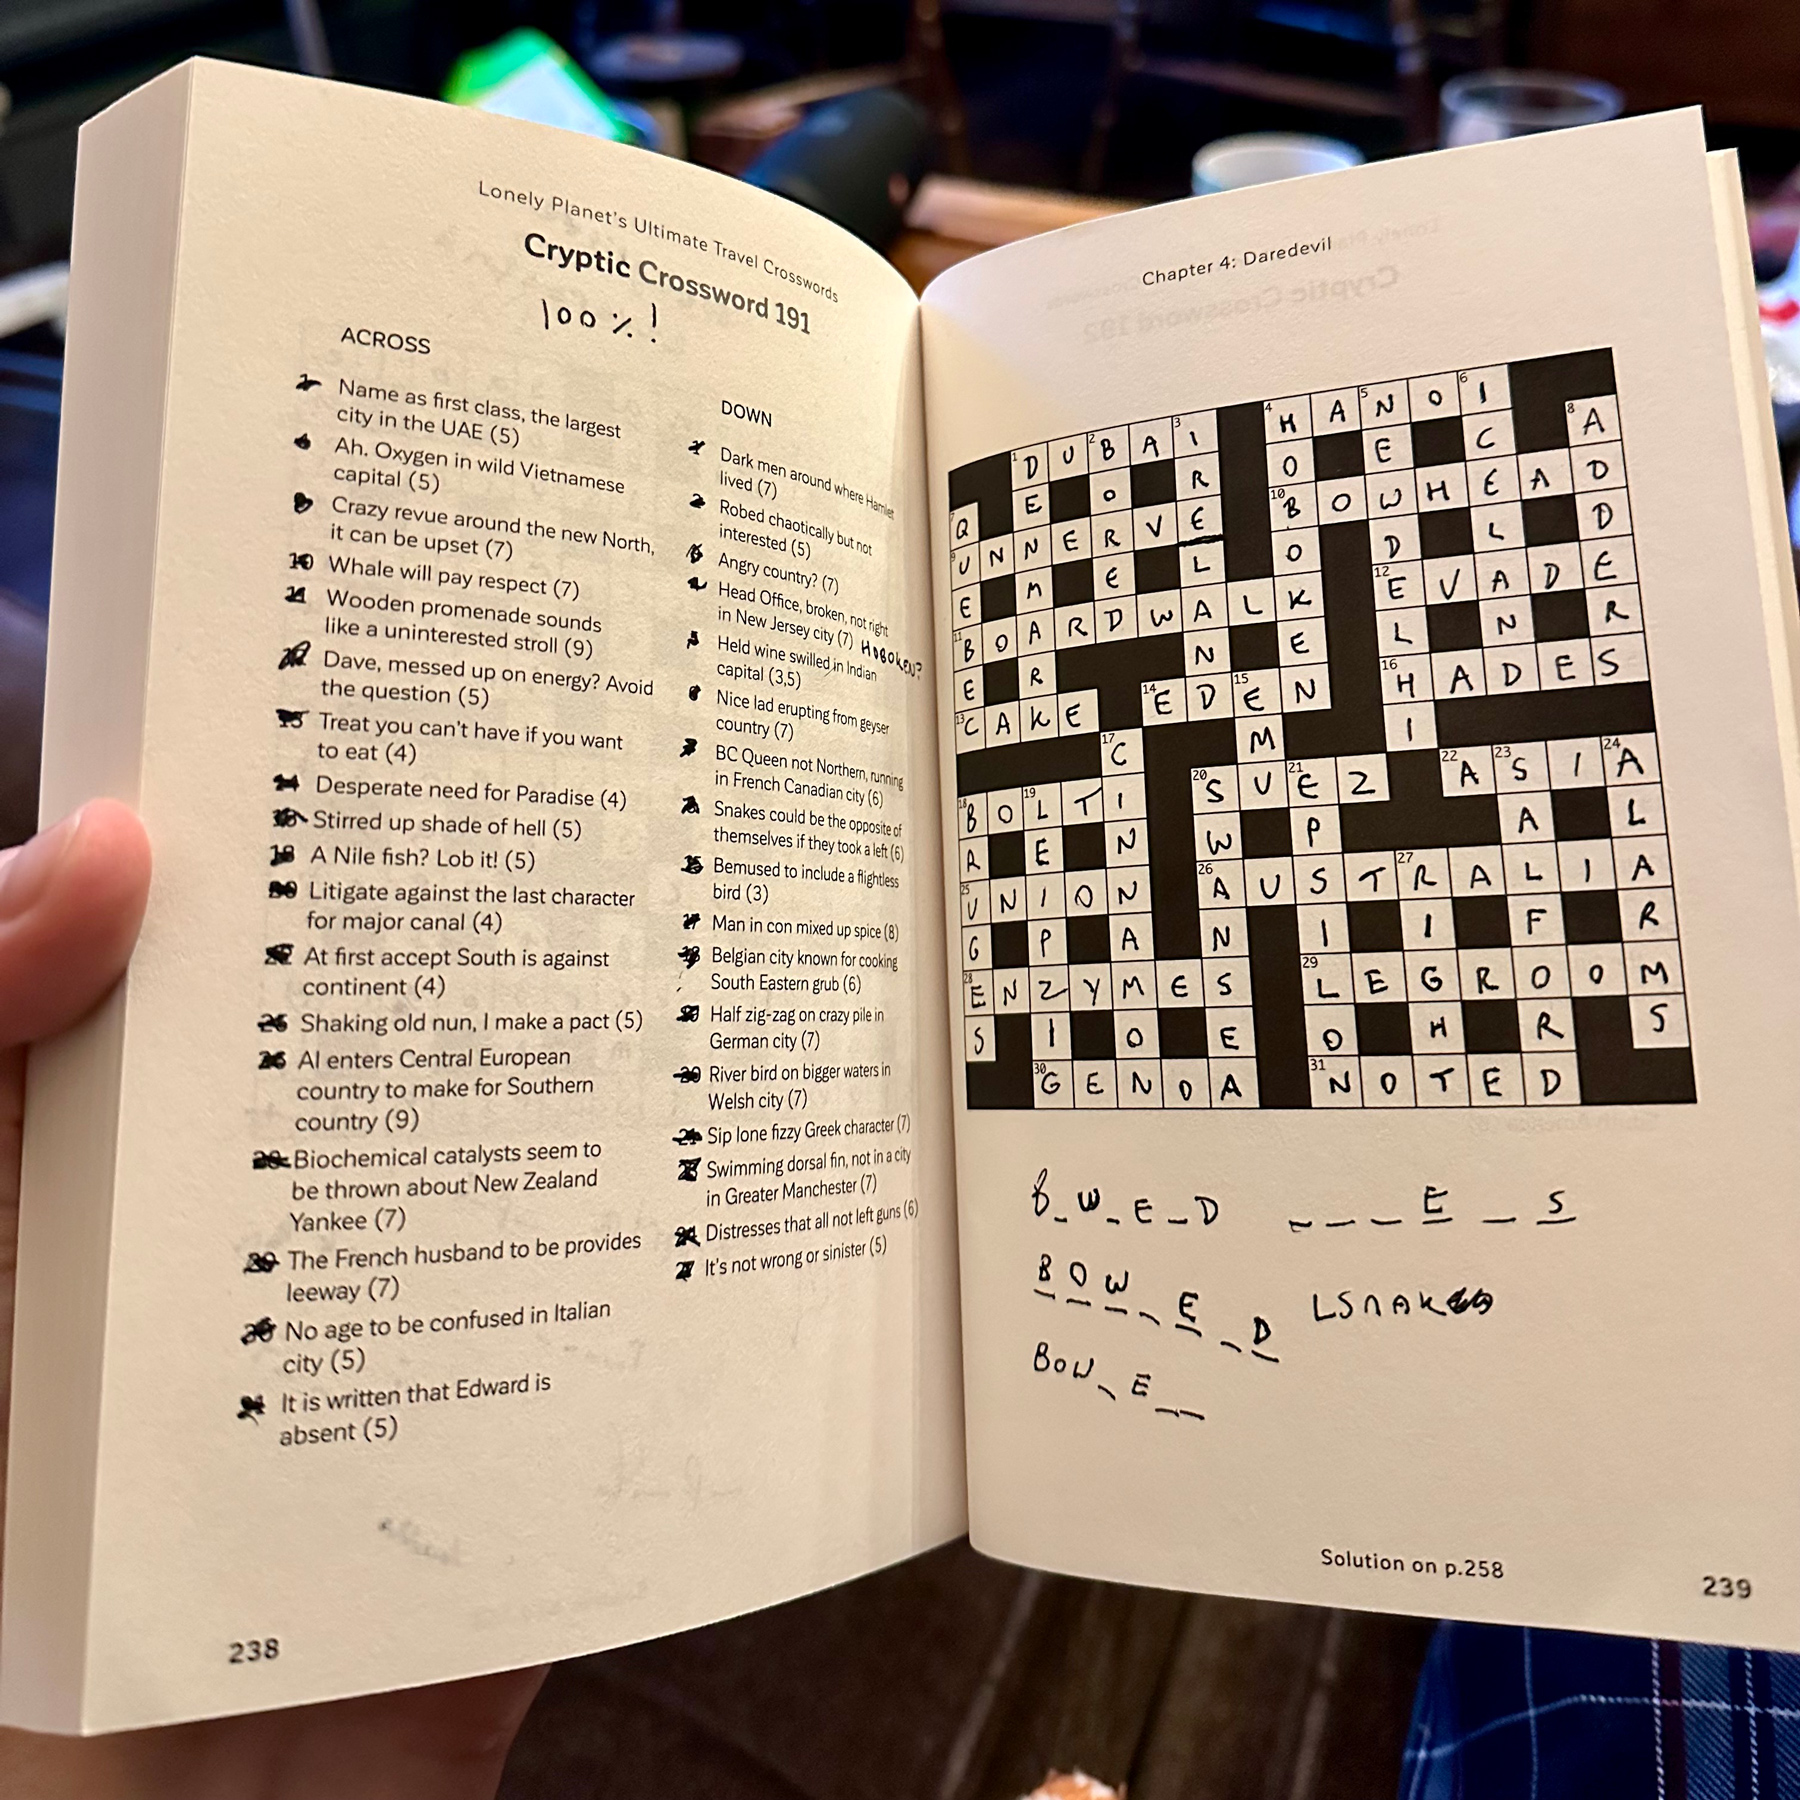 A completed cryptic crossword in a book